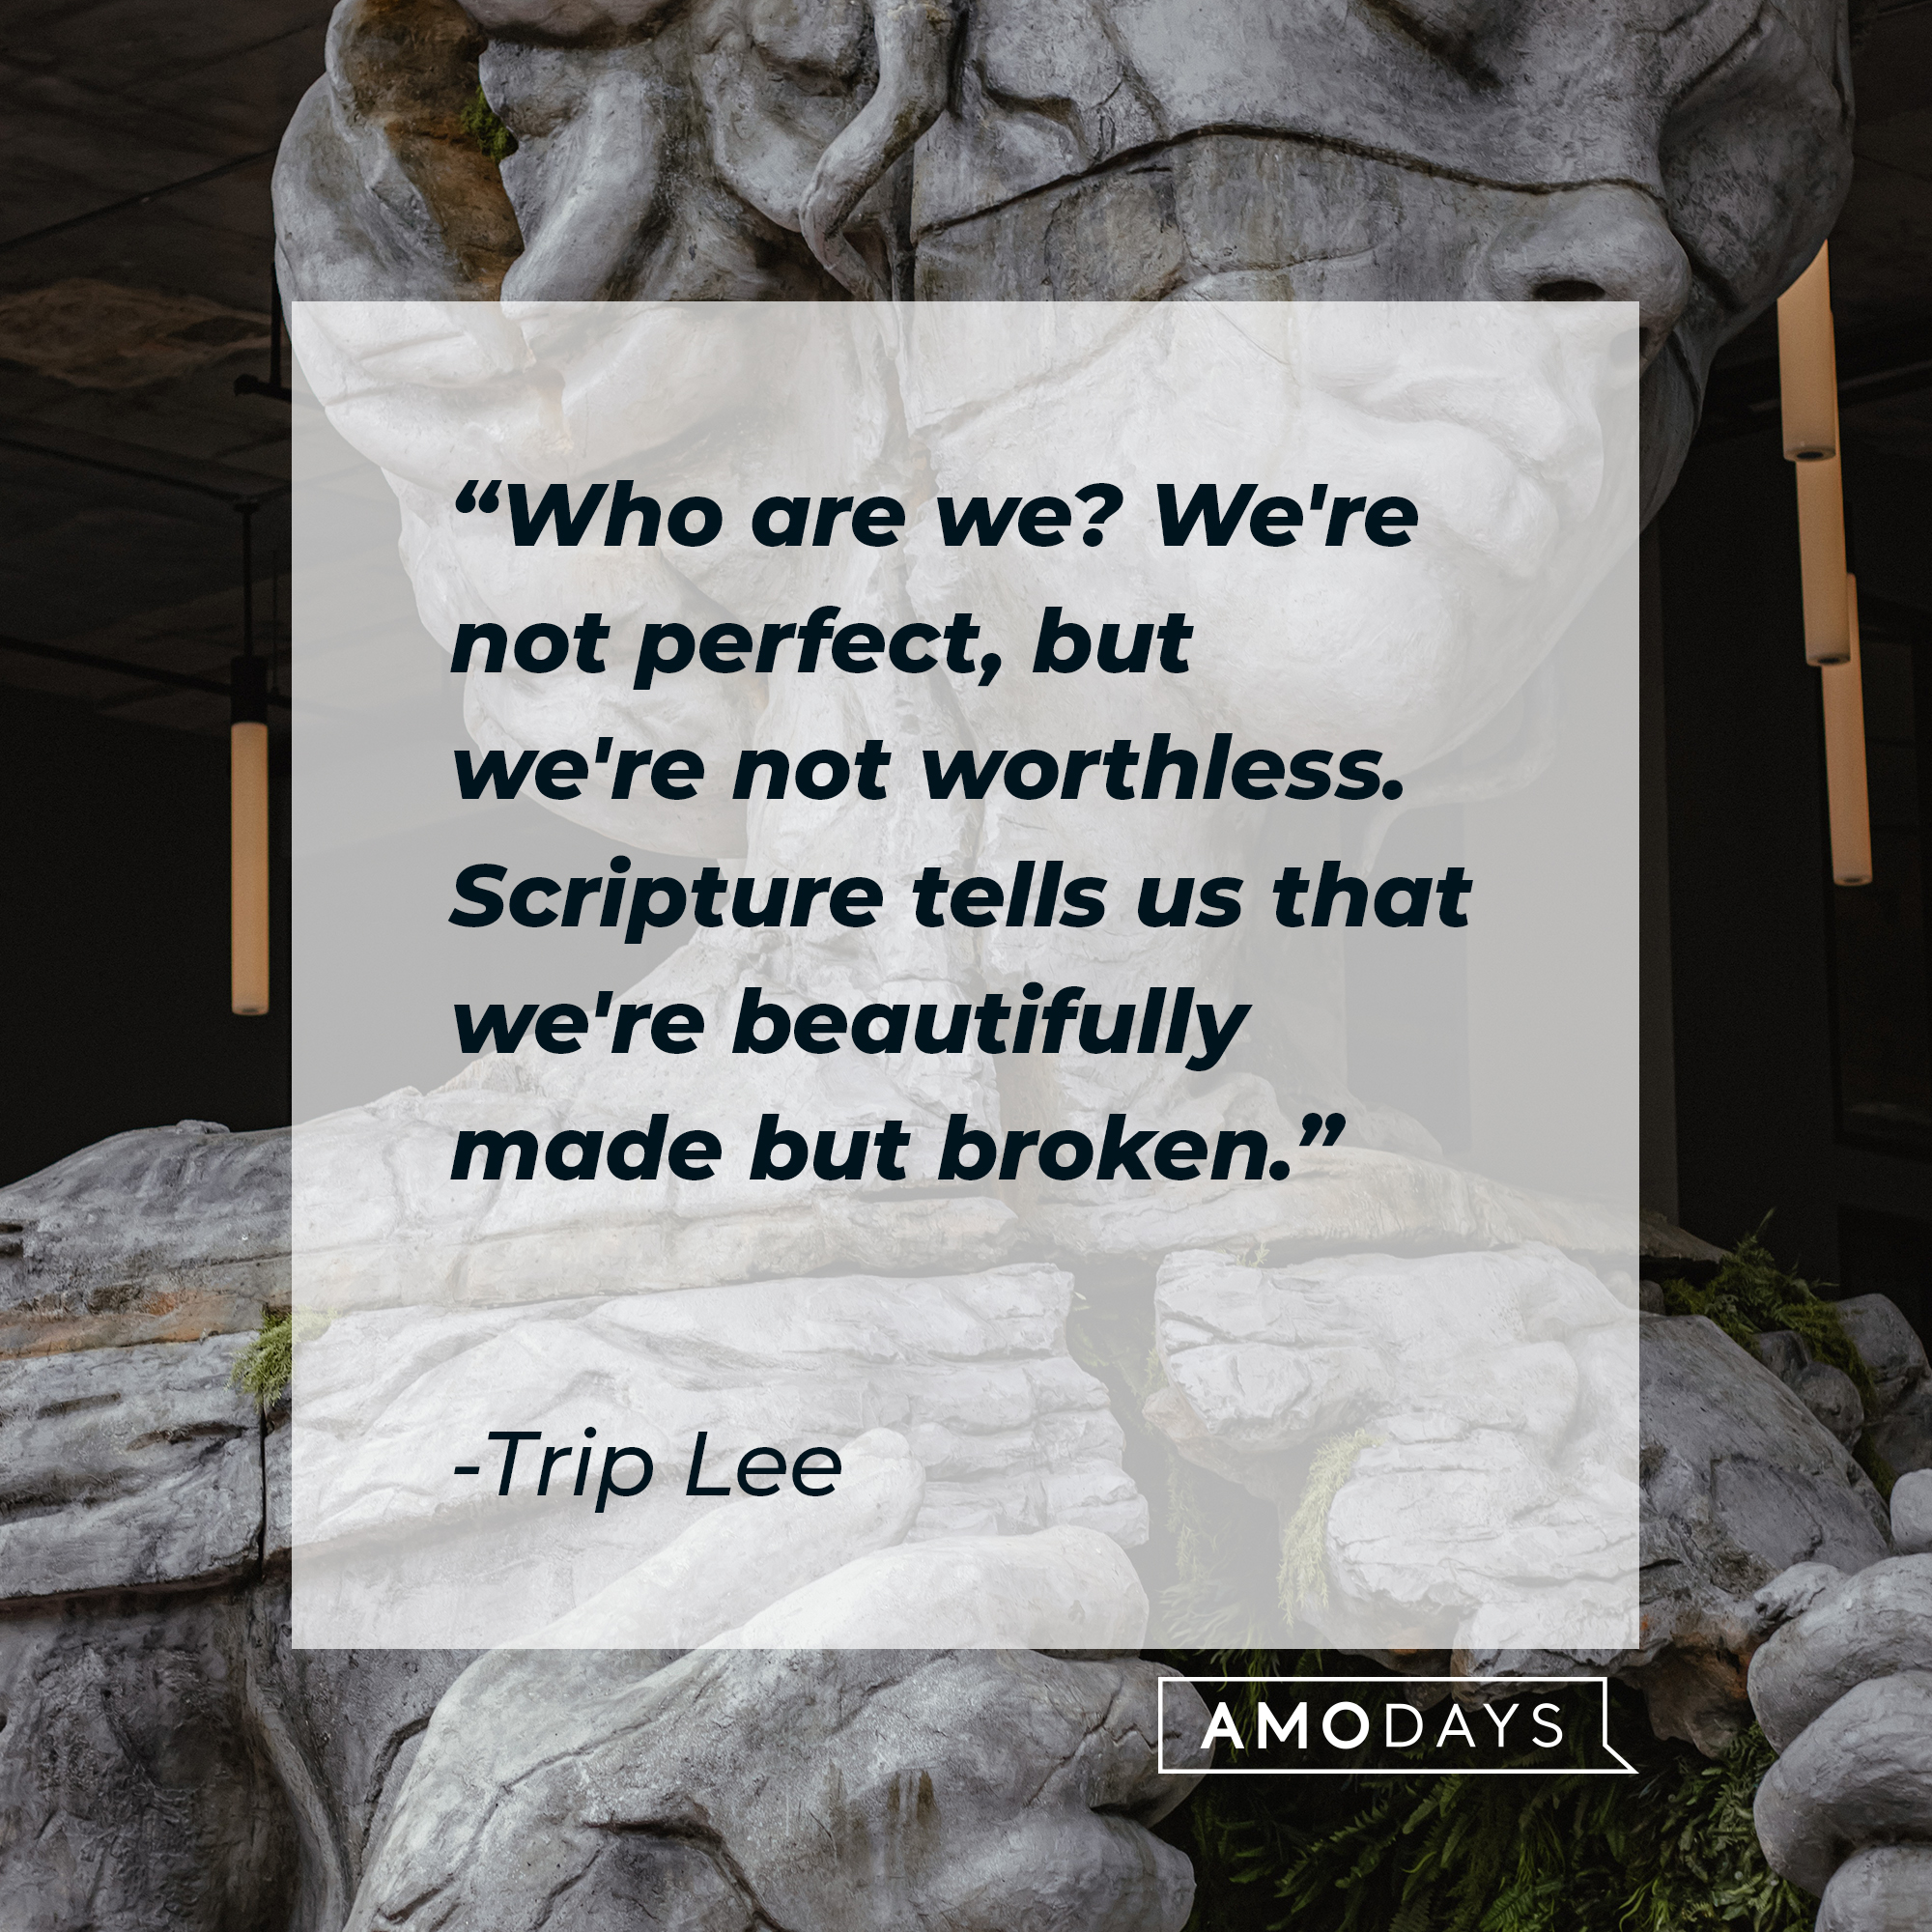 Trip Lee's quote: "Who are we? We're not perfect, but we're not worthless. Scripture tells us that we're beautifully made but broken." | Image: Unsplash